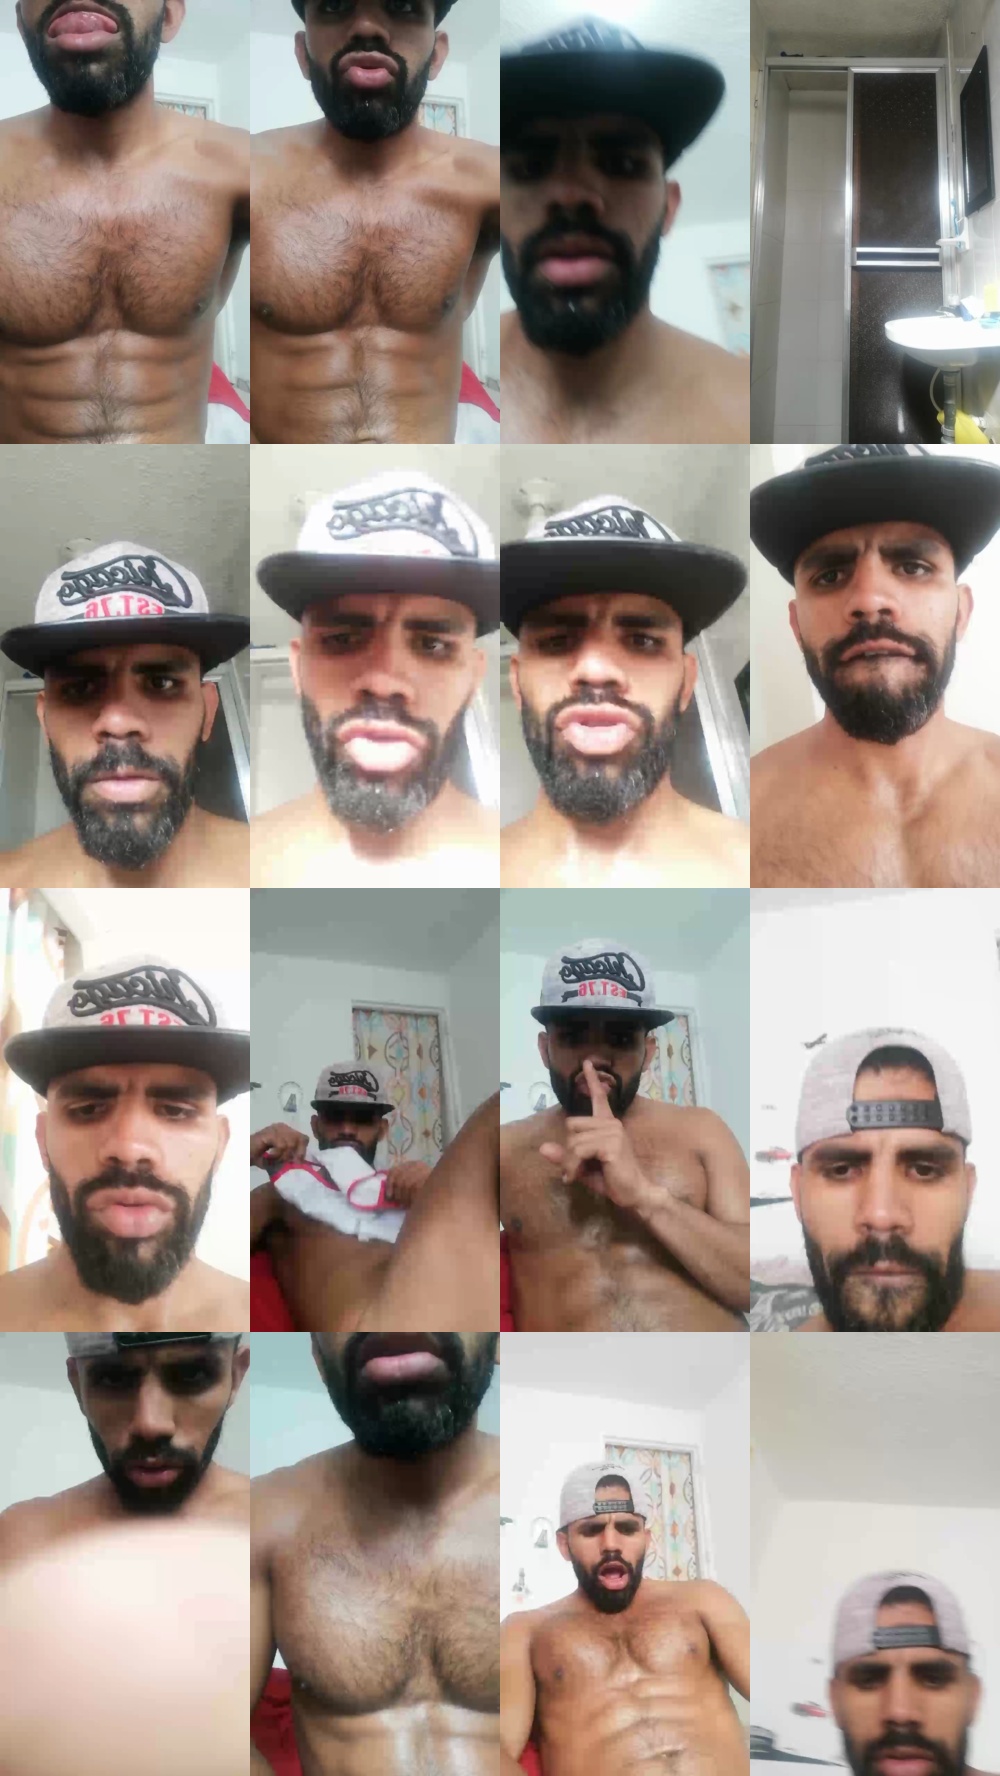 ronnie109 27-07-2019  Recorded Video Nude